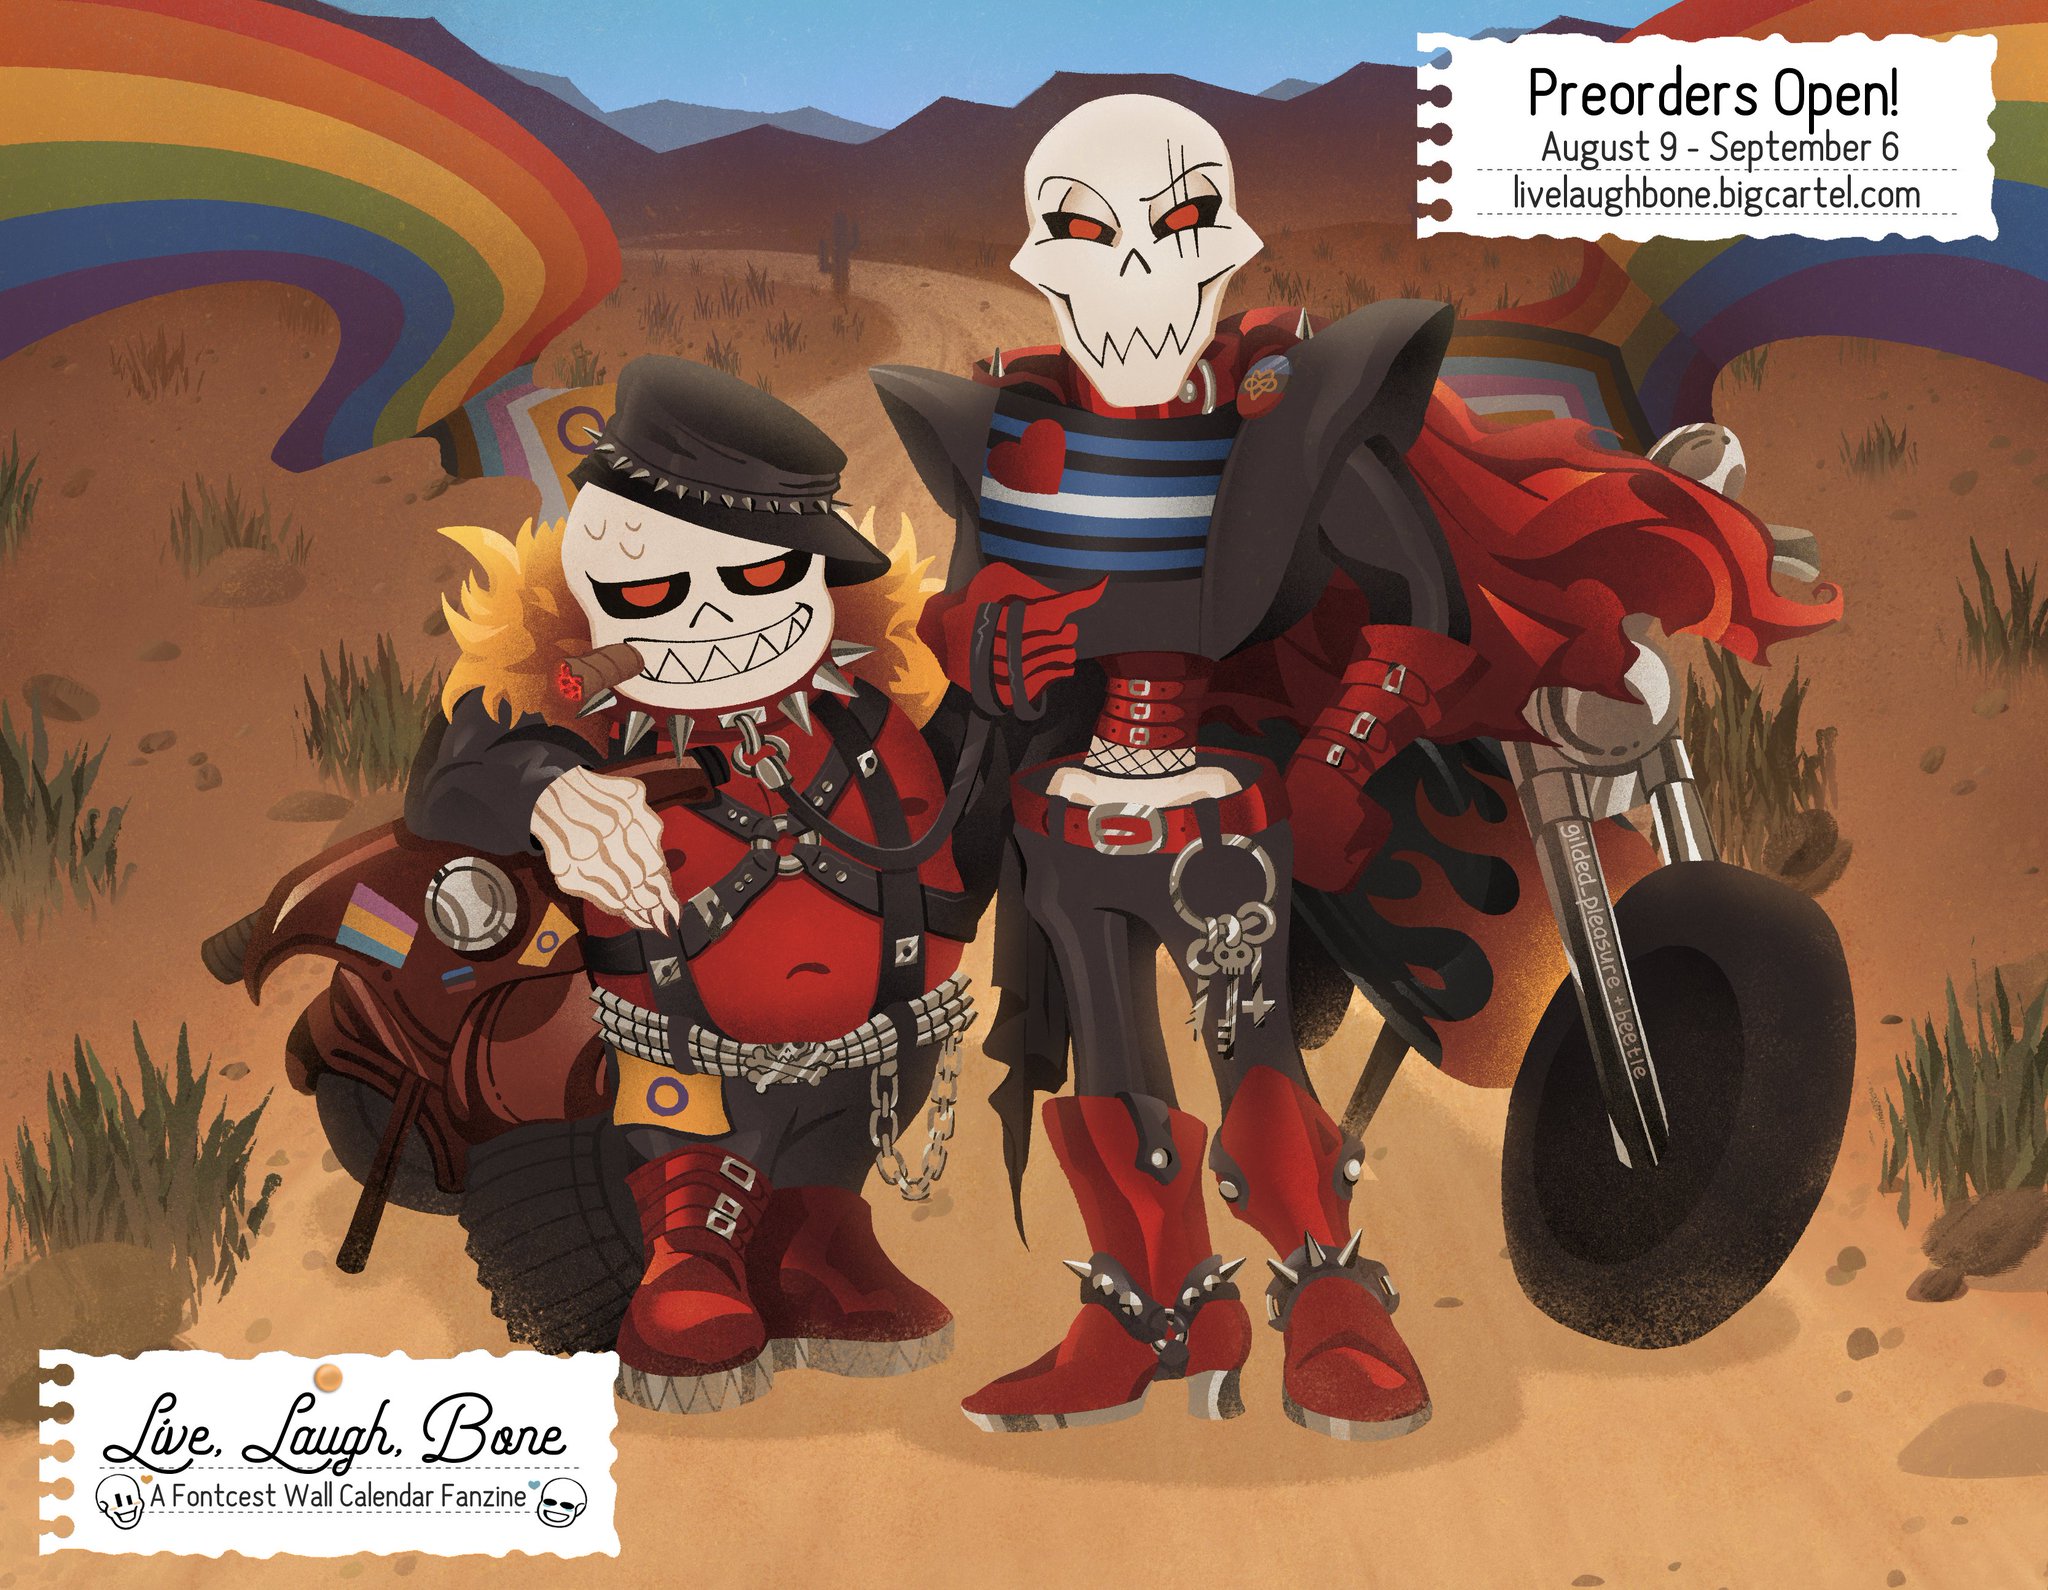 Underfell Sans and Papyrus! - Underfell - Magnet